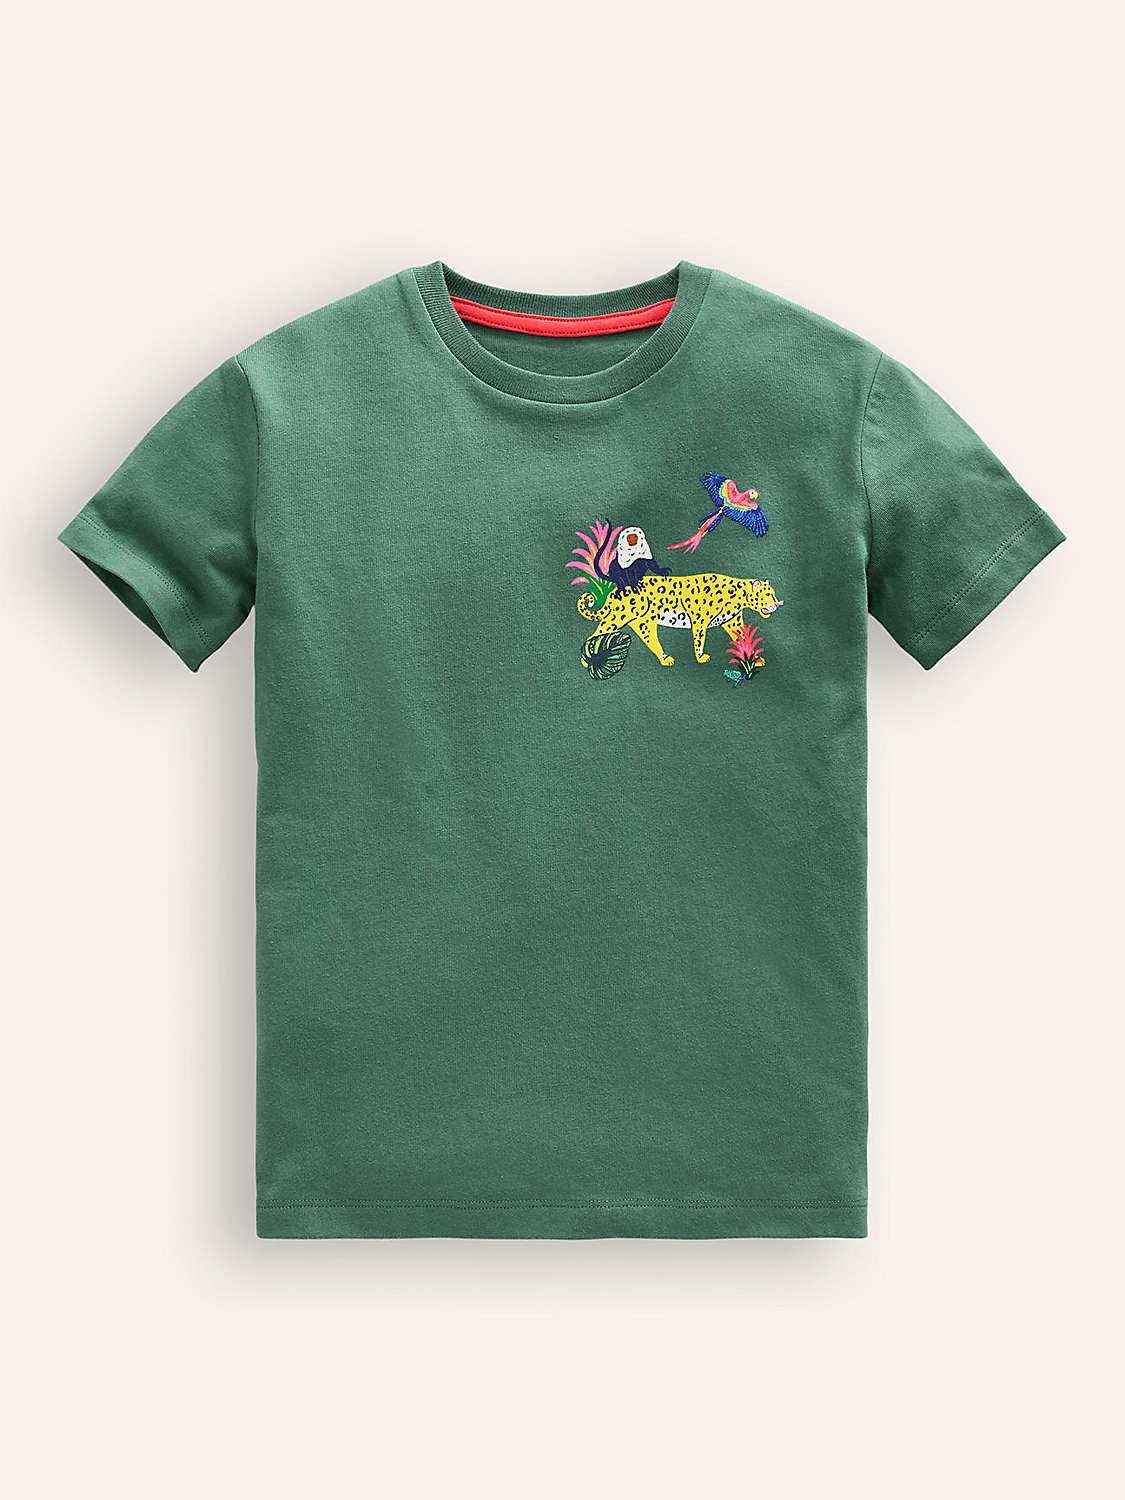 Buy Mini Boden Kids' Front & Back Amazon Print T-Shirt, Spruce Green Online at johnlewis.com